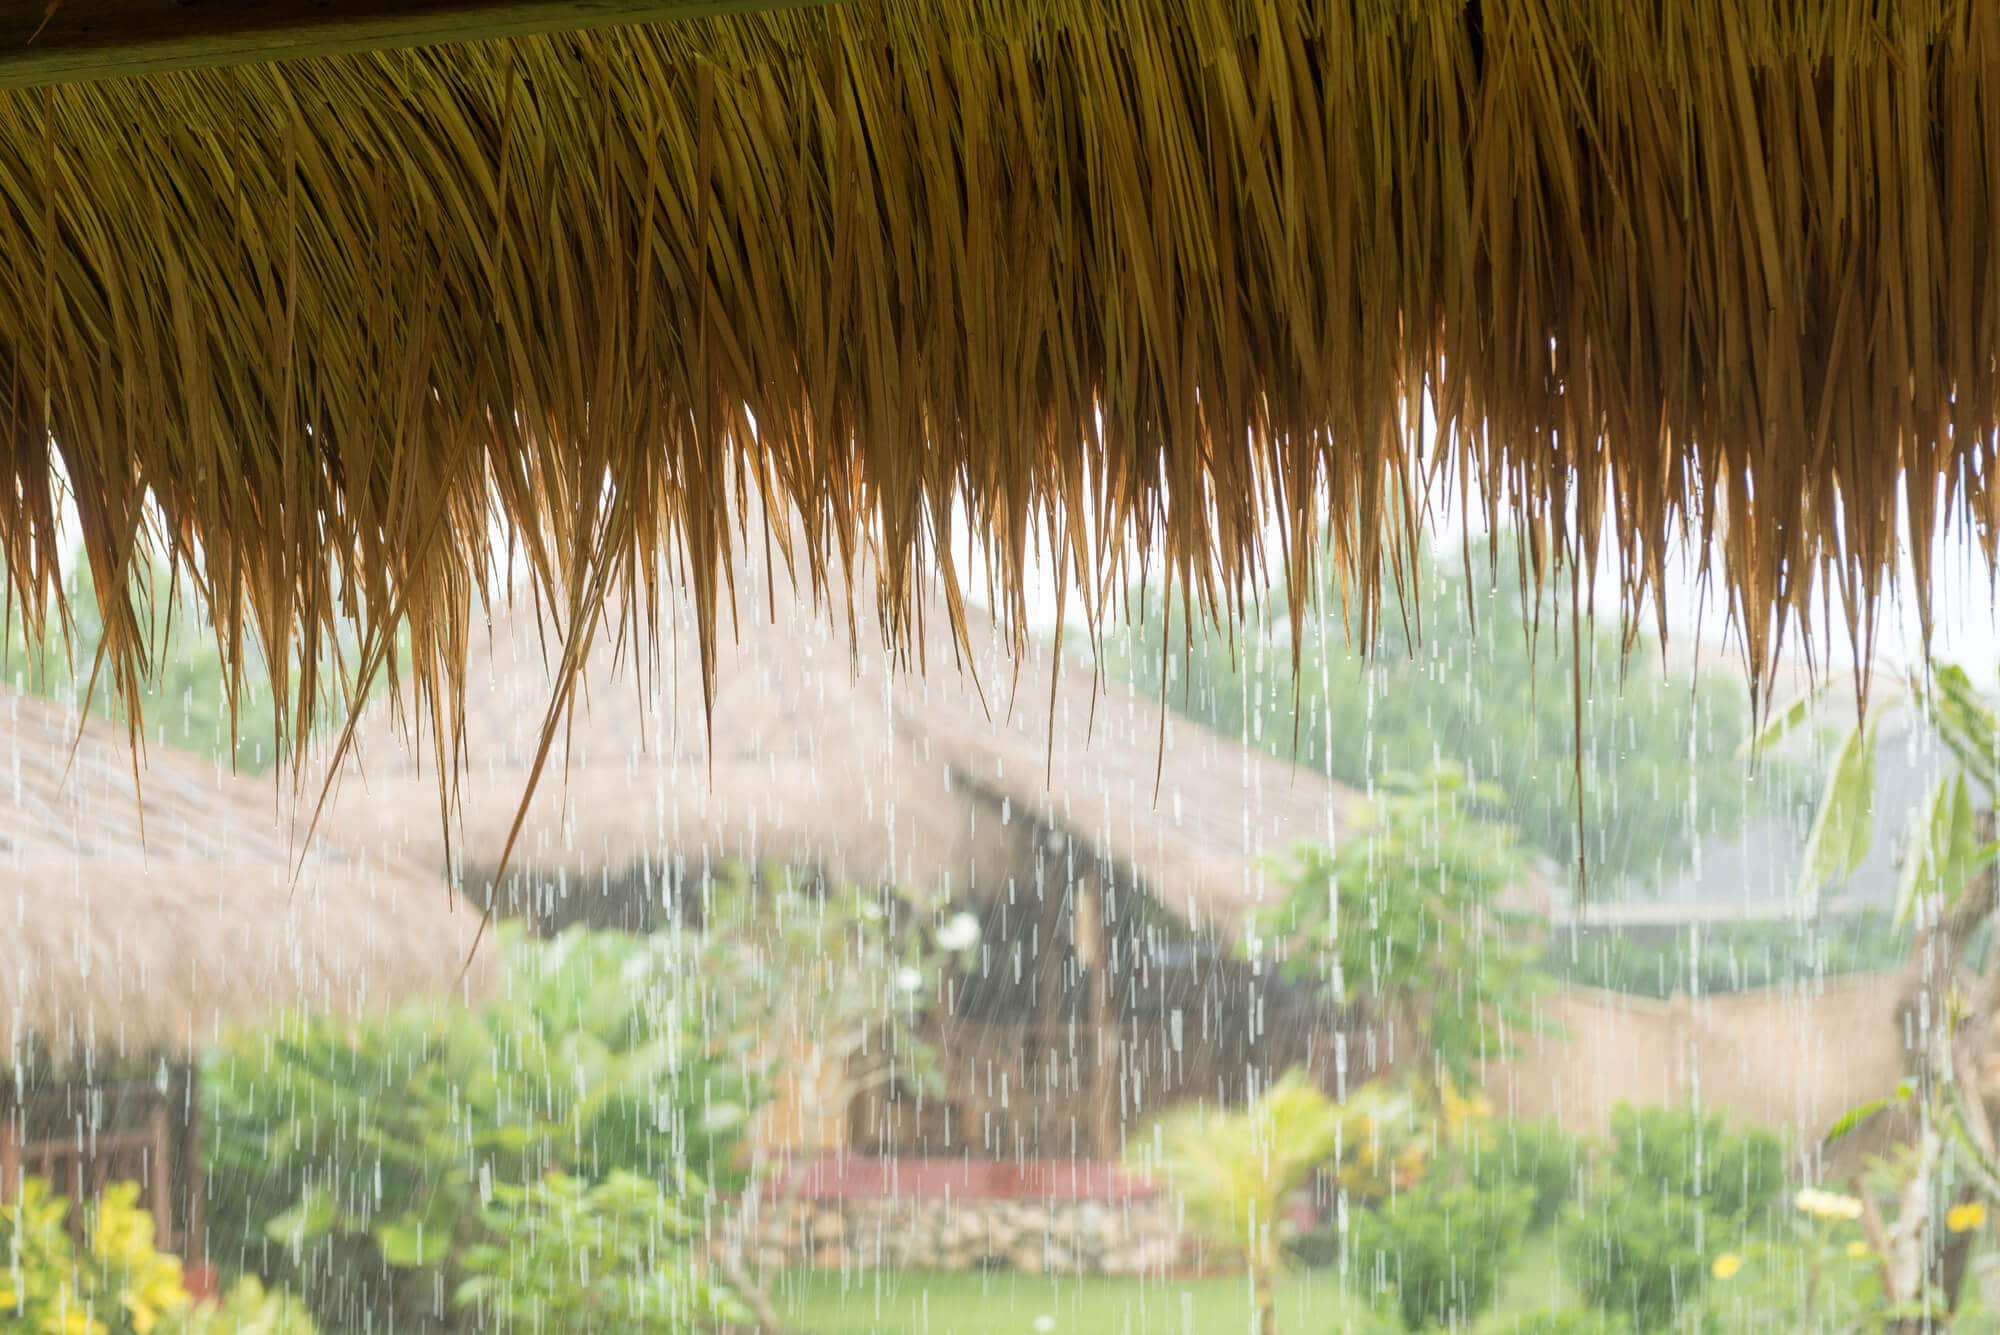 Looking out on the rain from a bungalow with straw roof, during the rainy season in Bali.